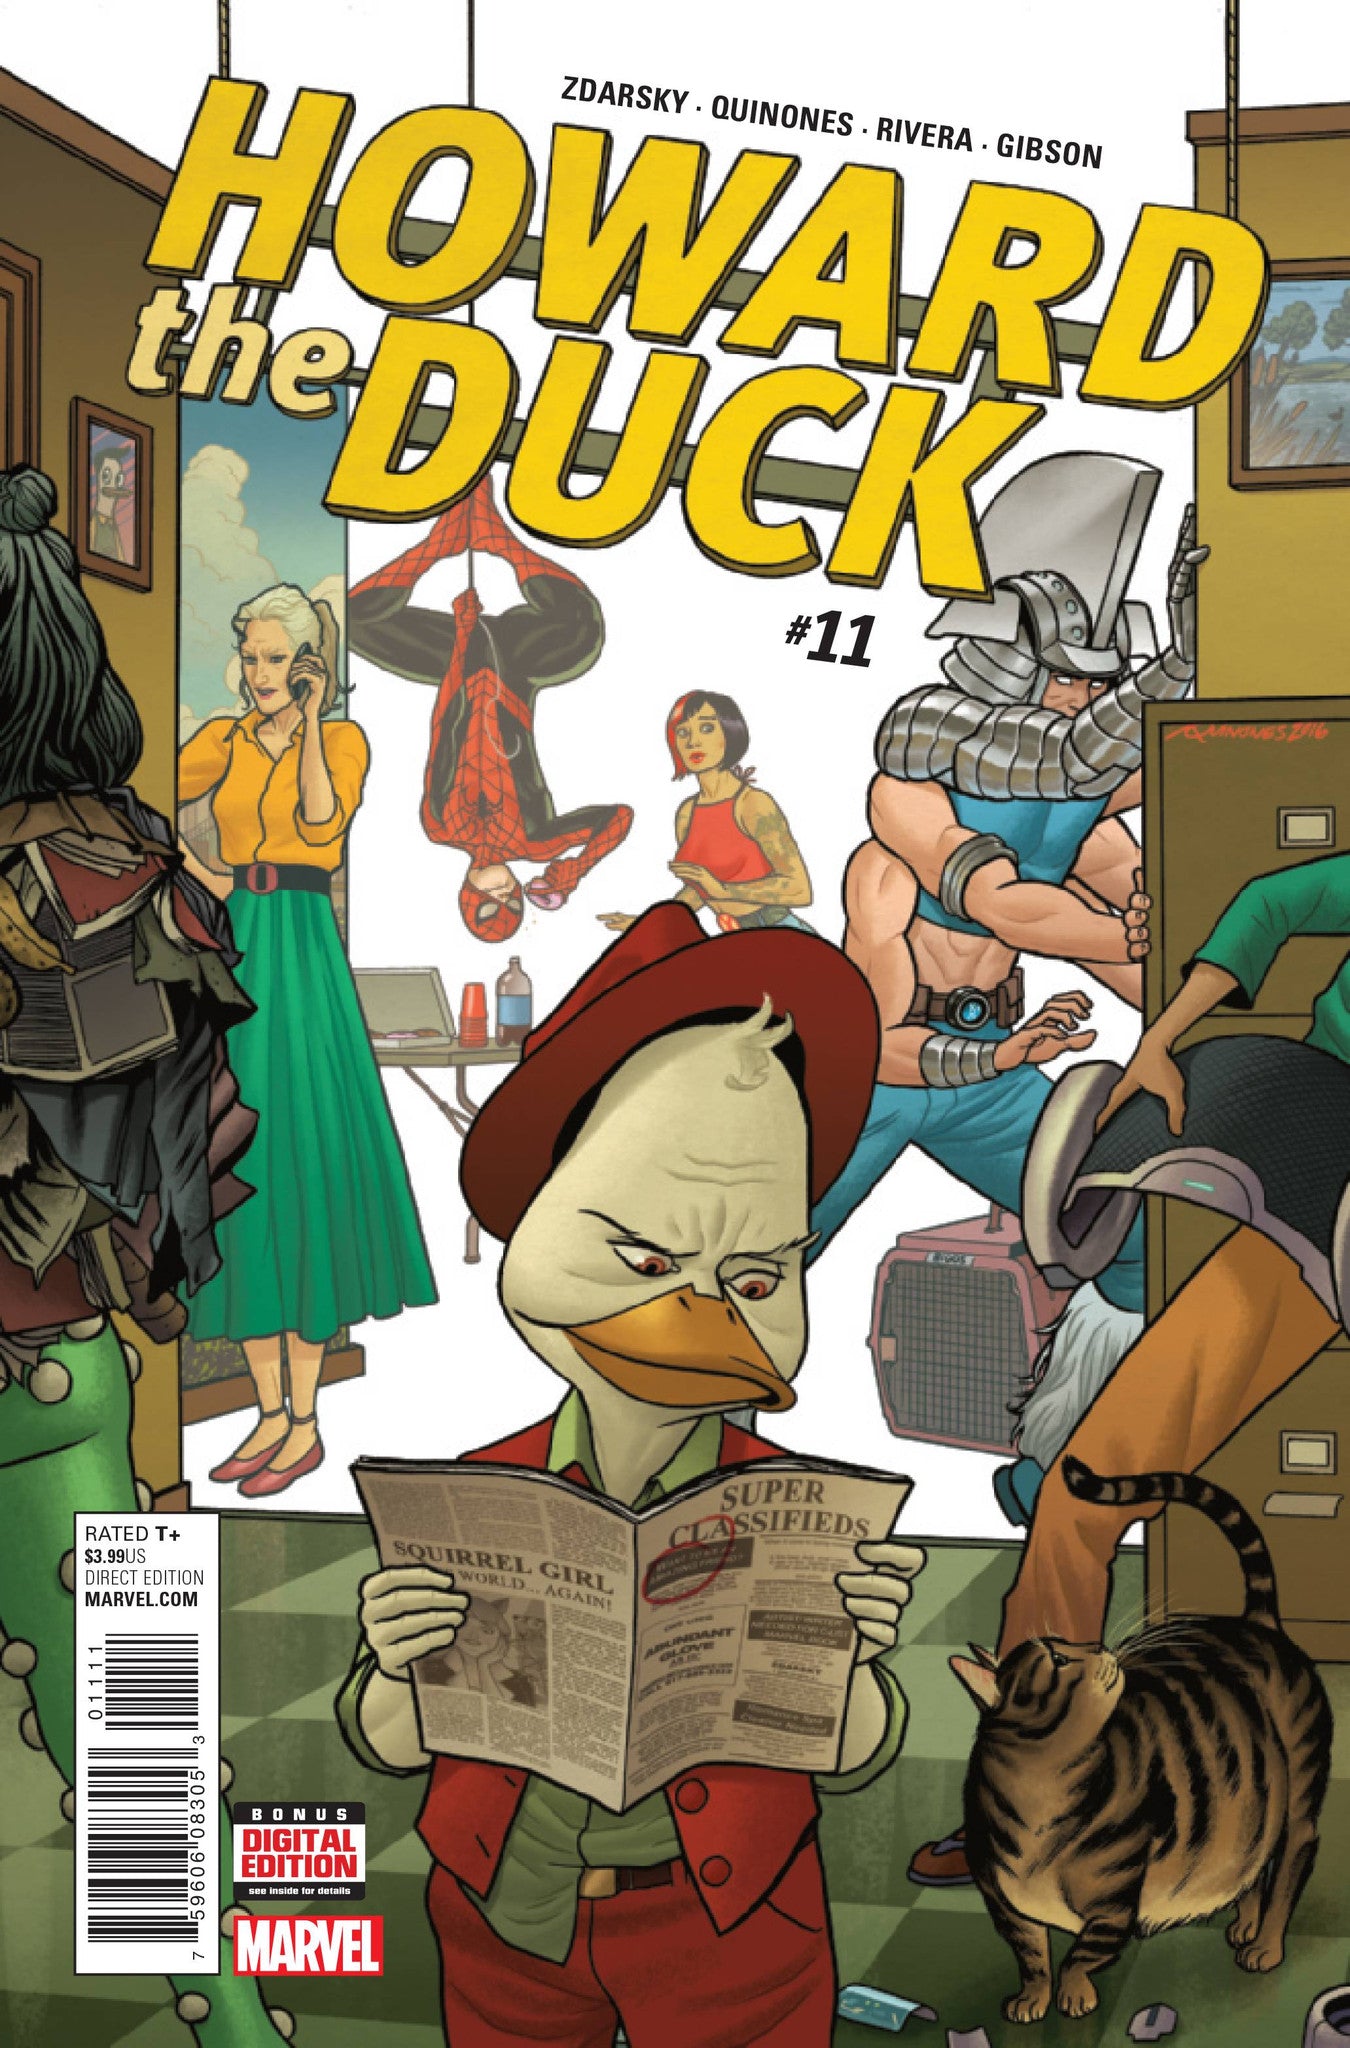 HOWARD THE DUCK #11 COVER